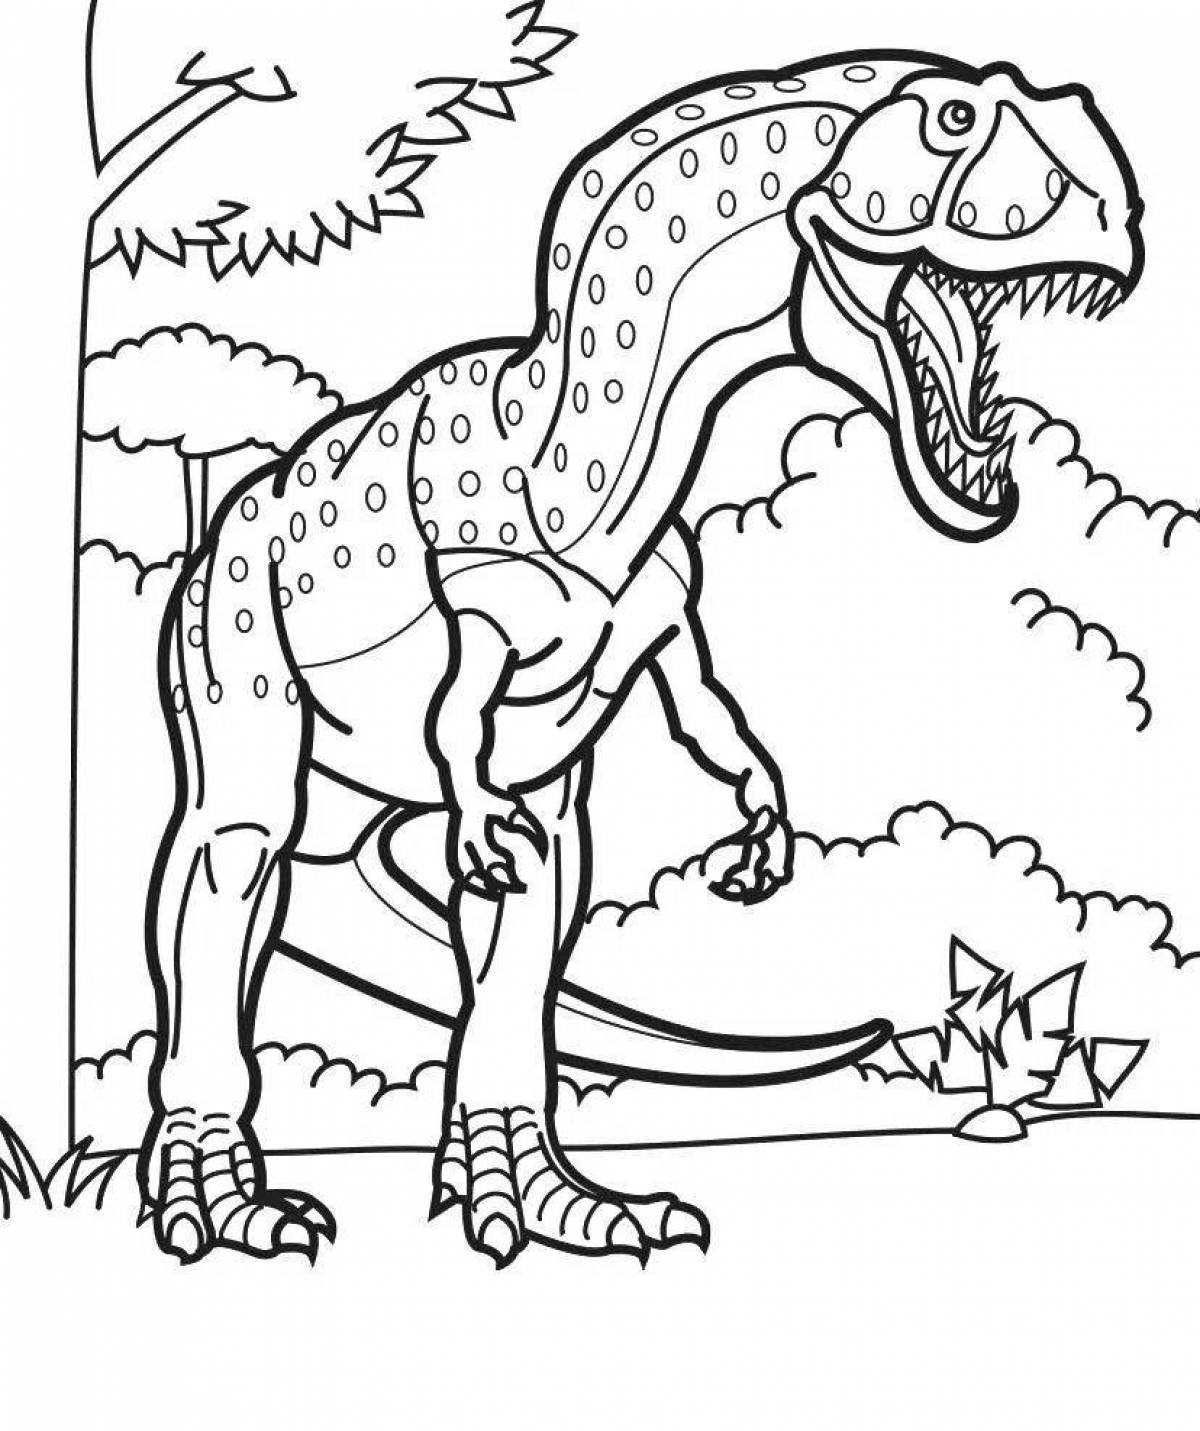 Fairytale dinosaur print coloring page